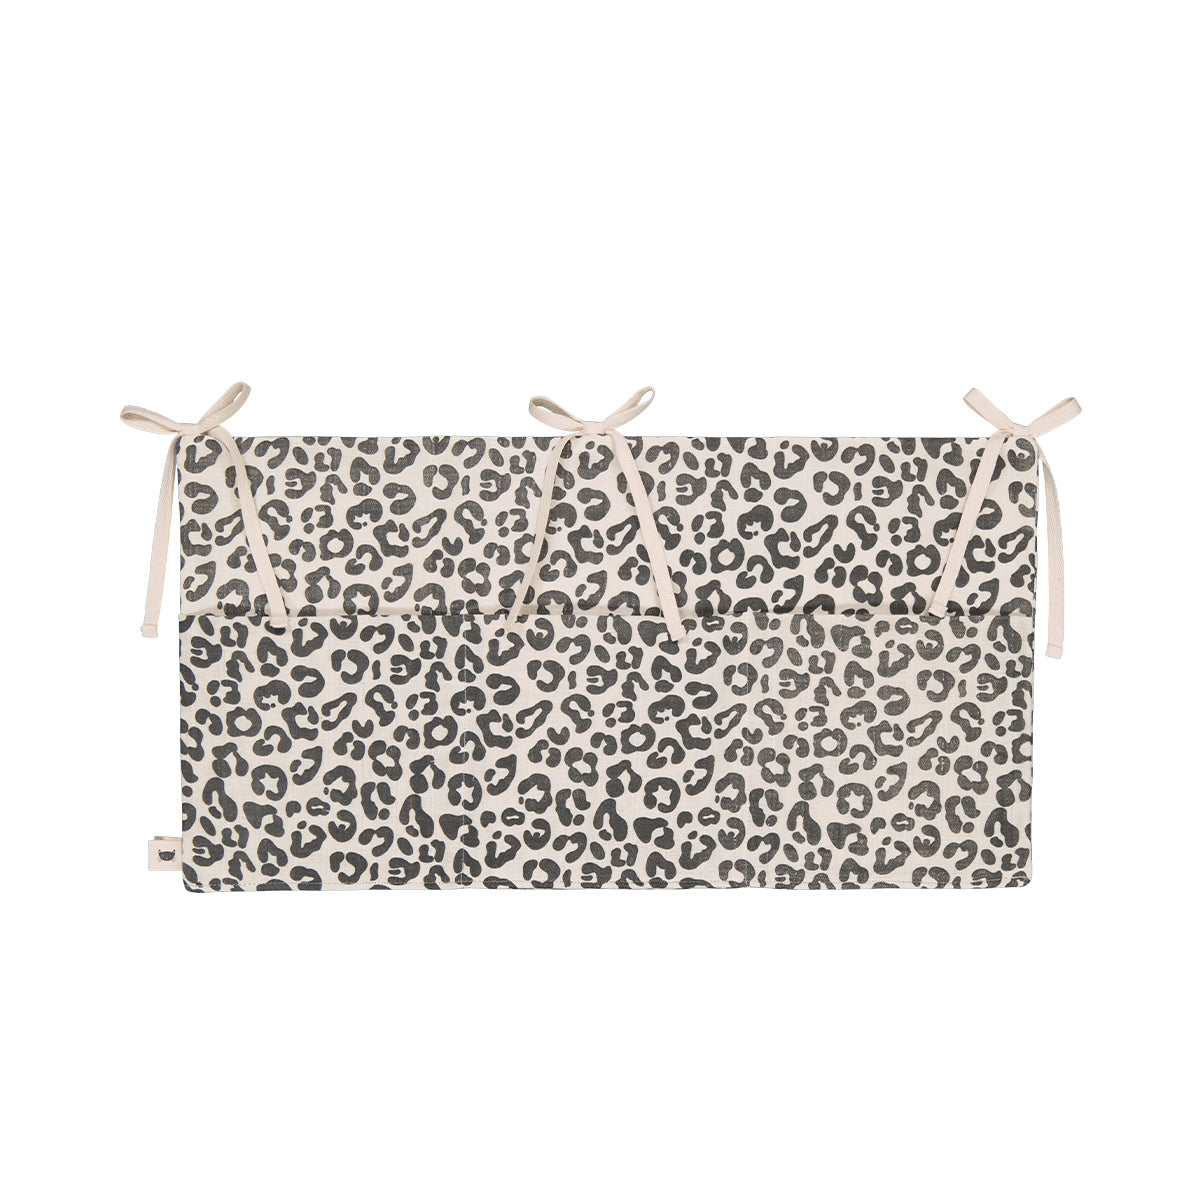 Bed pouch - Mathilde Graou